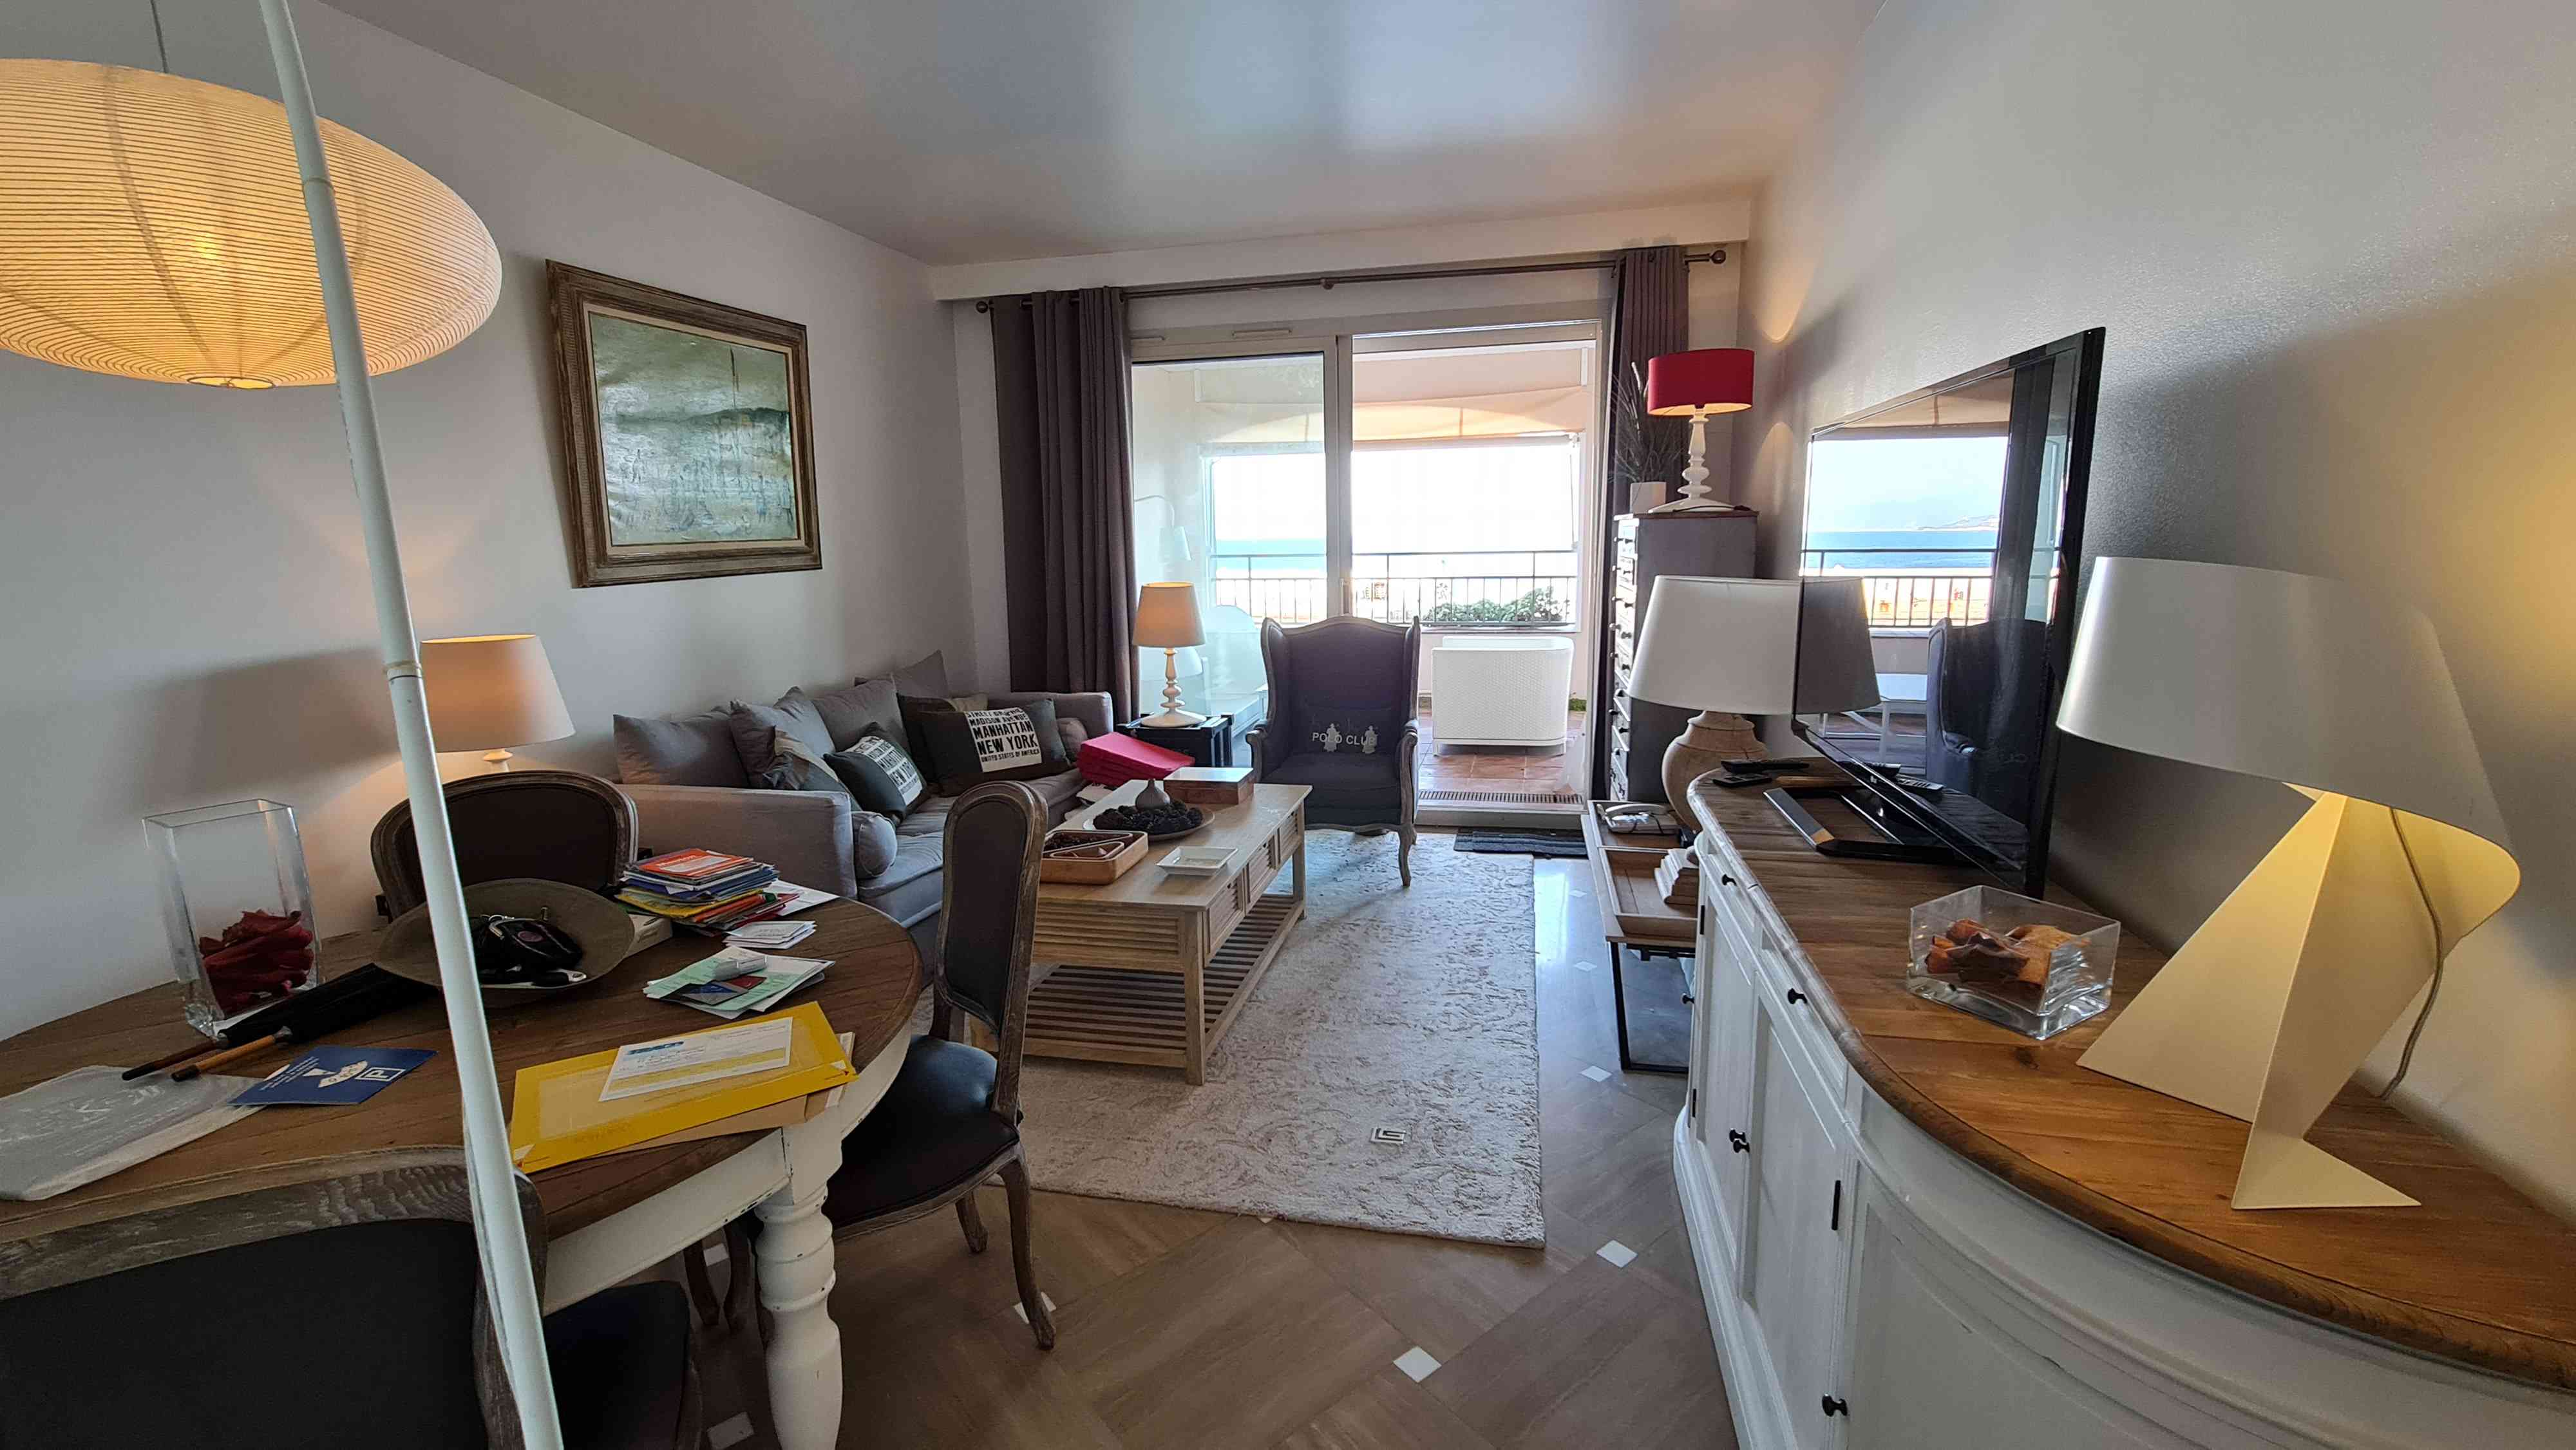                                                                                                                                         1 BED ROOM FLAT ON WATER EDGE                                                                     
                                                             